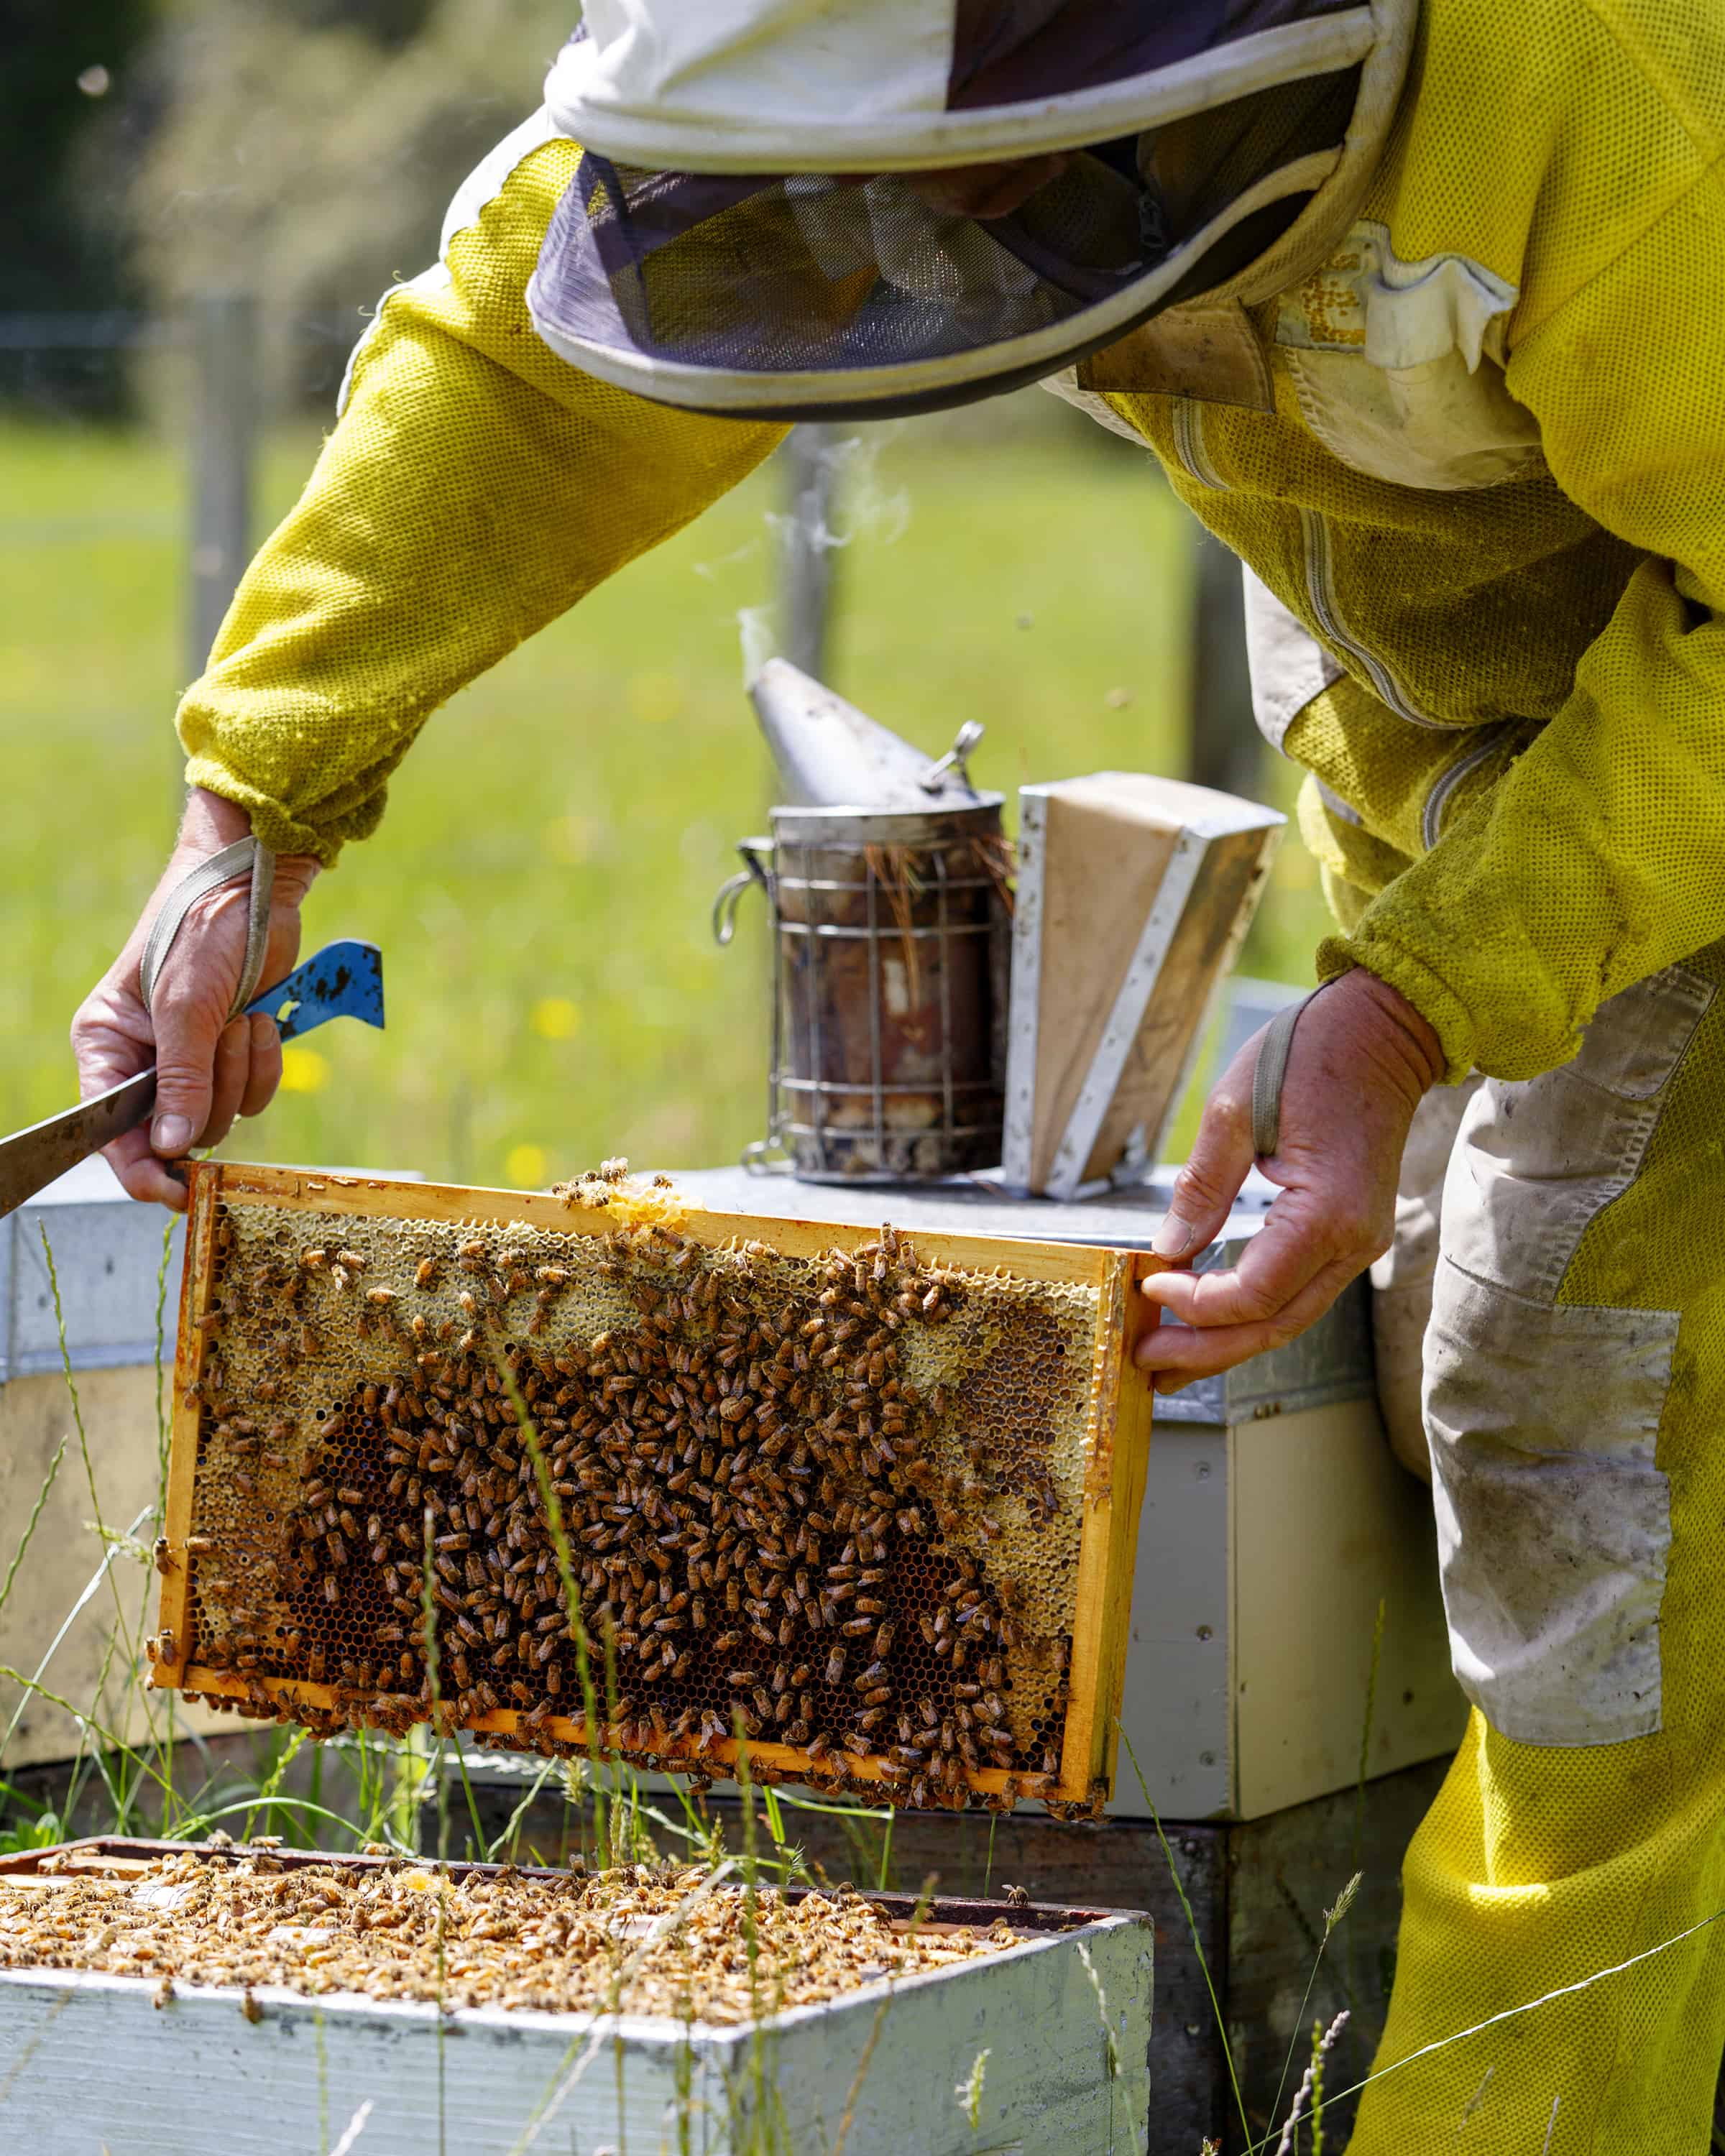 Where does your honey come from?